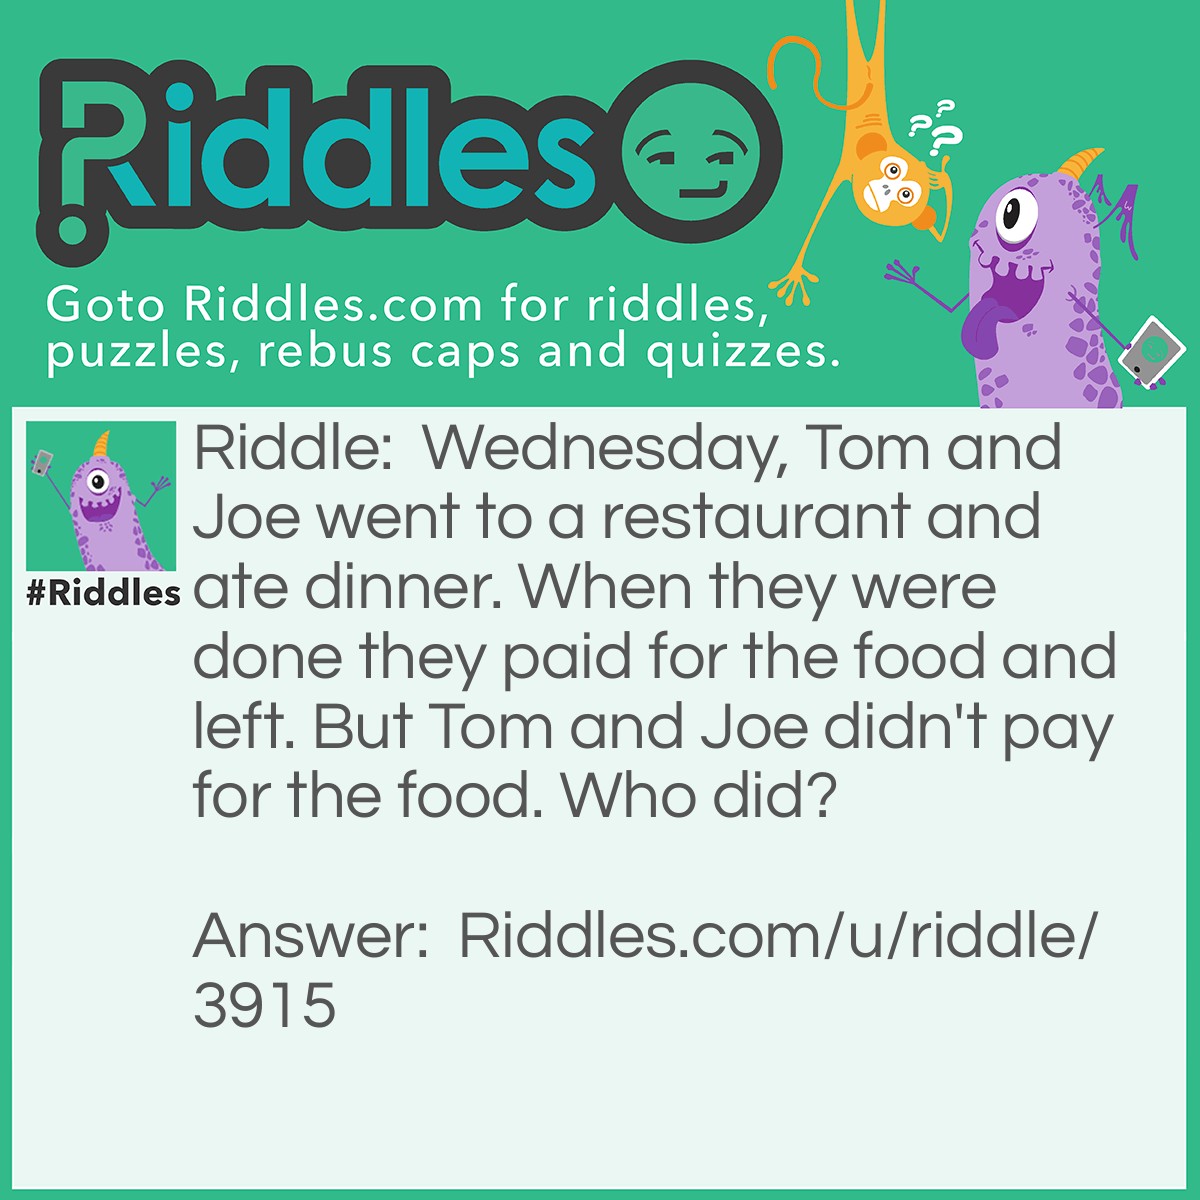 Riddle: Wednesday, Tom and Joe went to a restaurant and ate dinner. When they were done they paid for the food and left. But Tom and Joe didn't pay for the food. Who did? Answer: Wednesday (the name of the third person in the group, not the day).